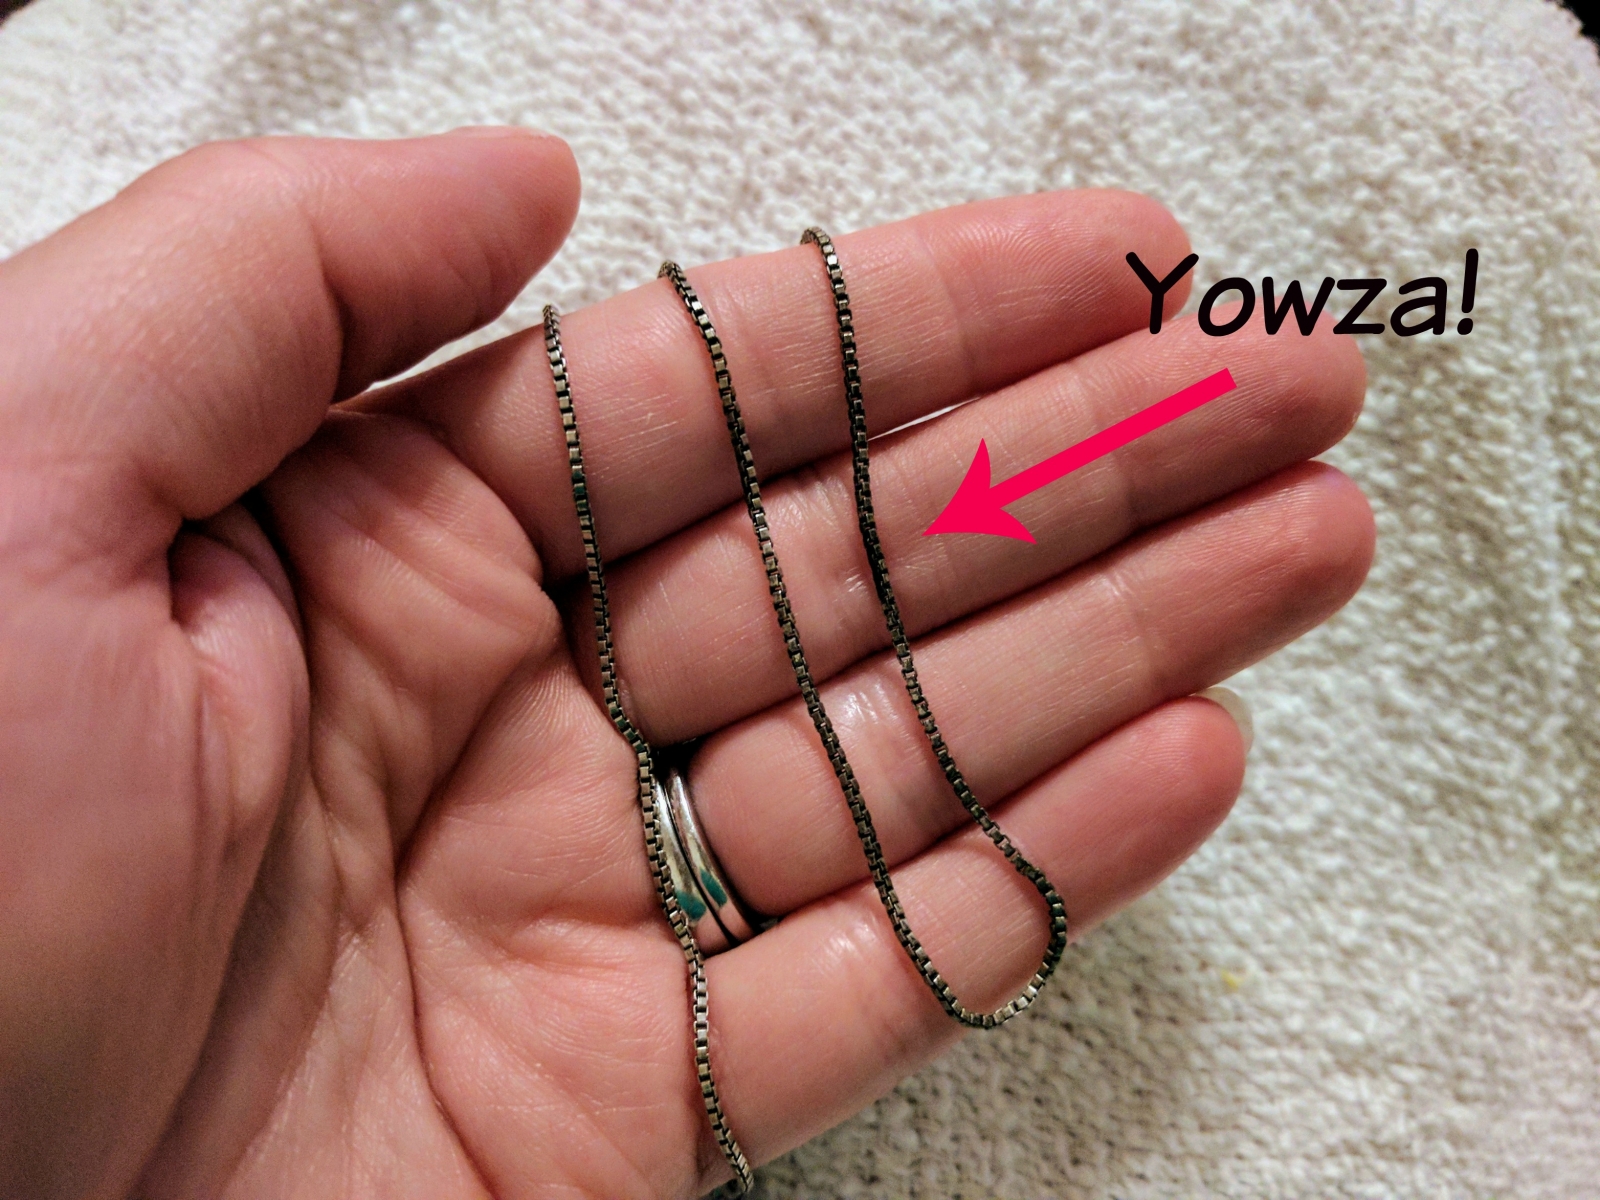 How To Clean Jewelry At Home : DIY Recipe